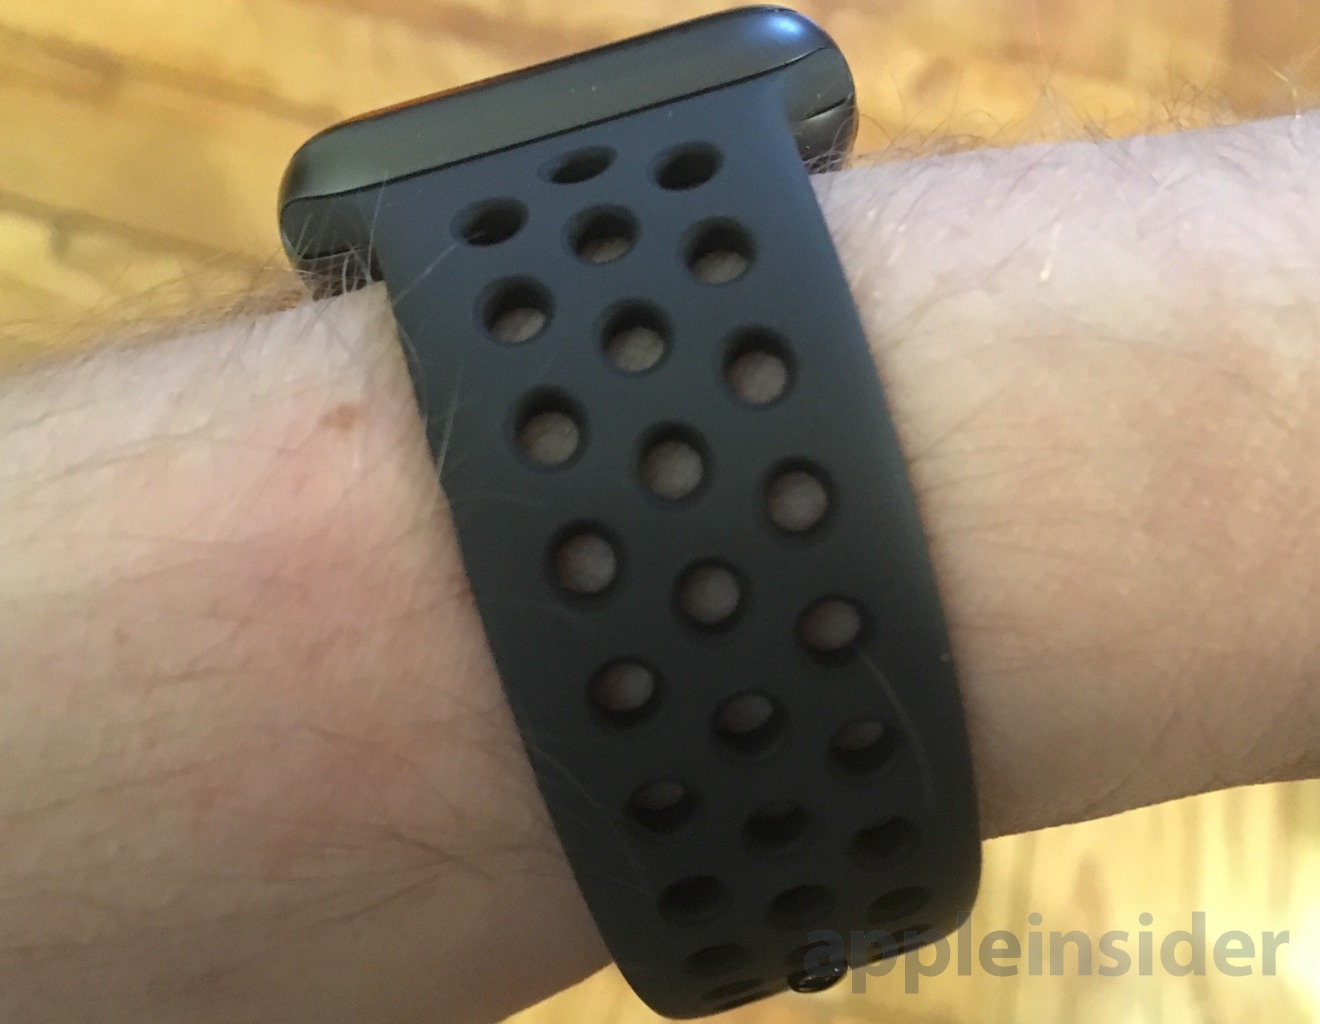 First look: Lightweight Nike Sport Band is now sold separately Apple Watch for $49 | AppleInsider